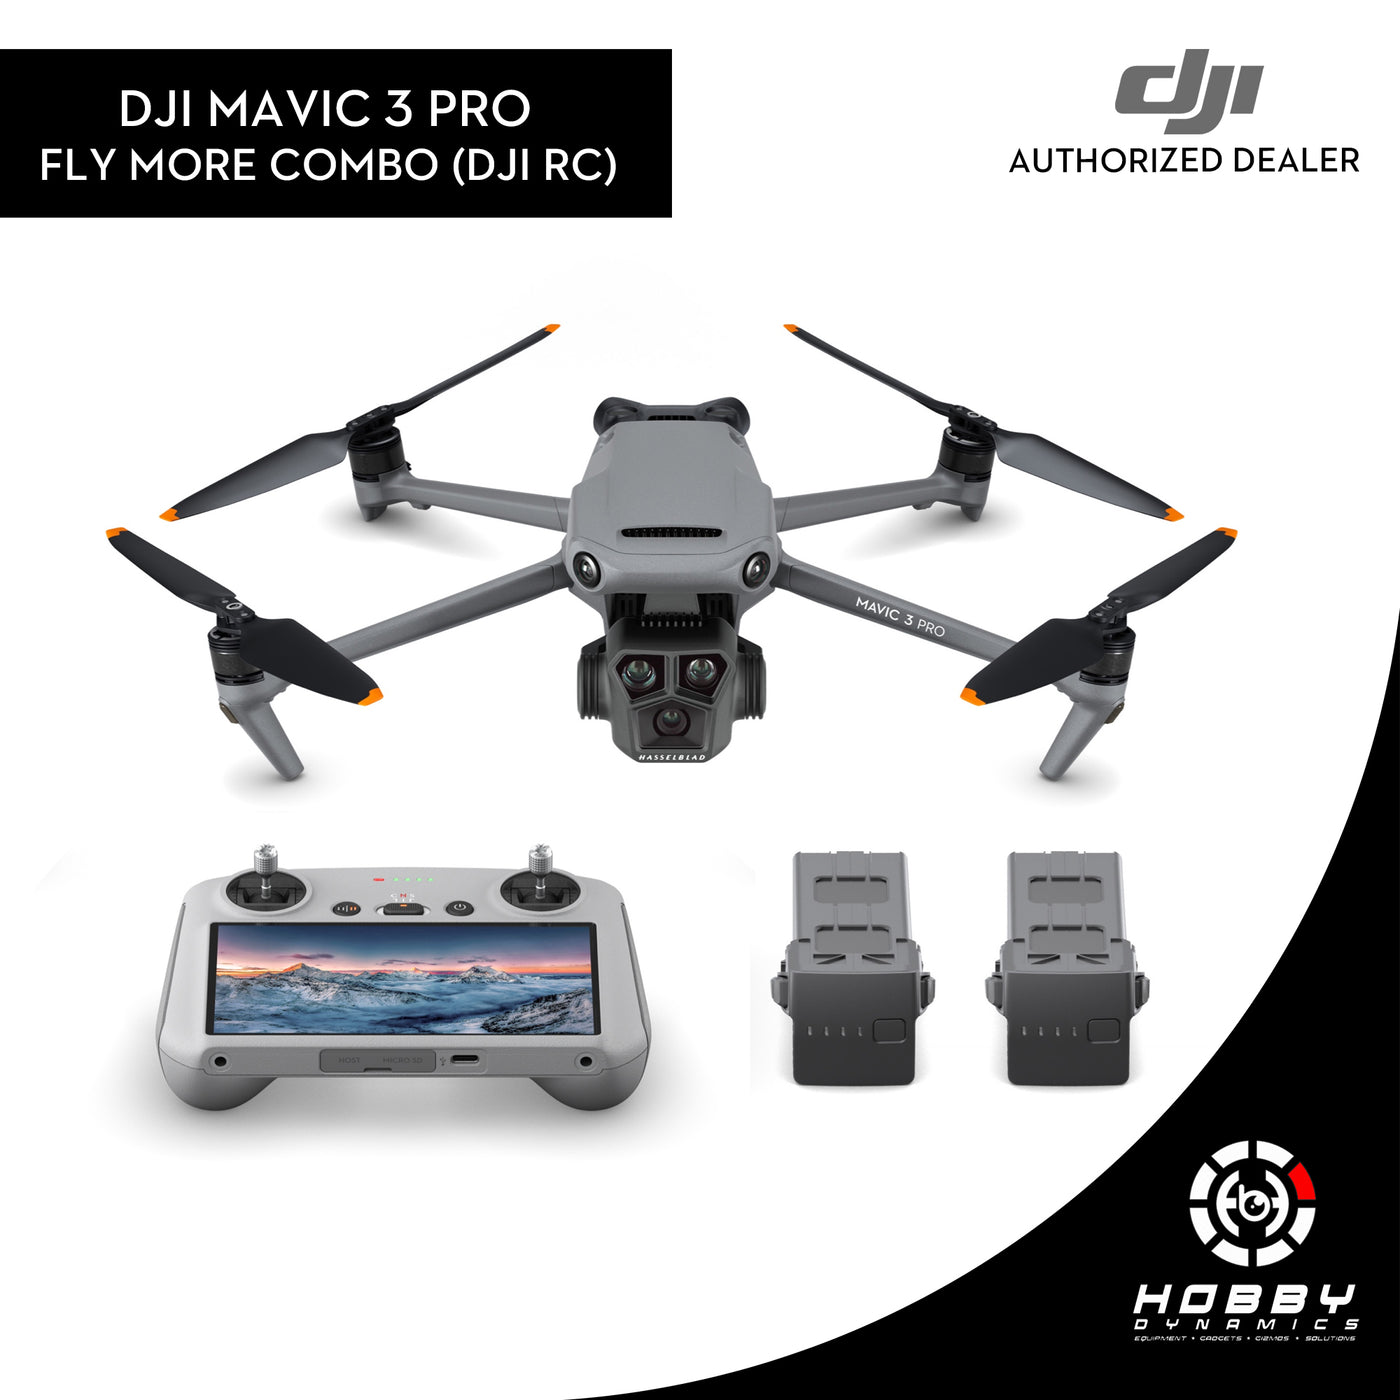 DJI Mavic 3 Pro Fly More Combo (DJI RC) with FREE Sandisk Extreme 64GB SD Card